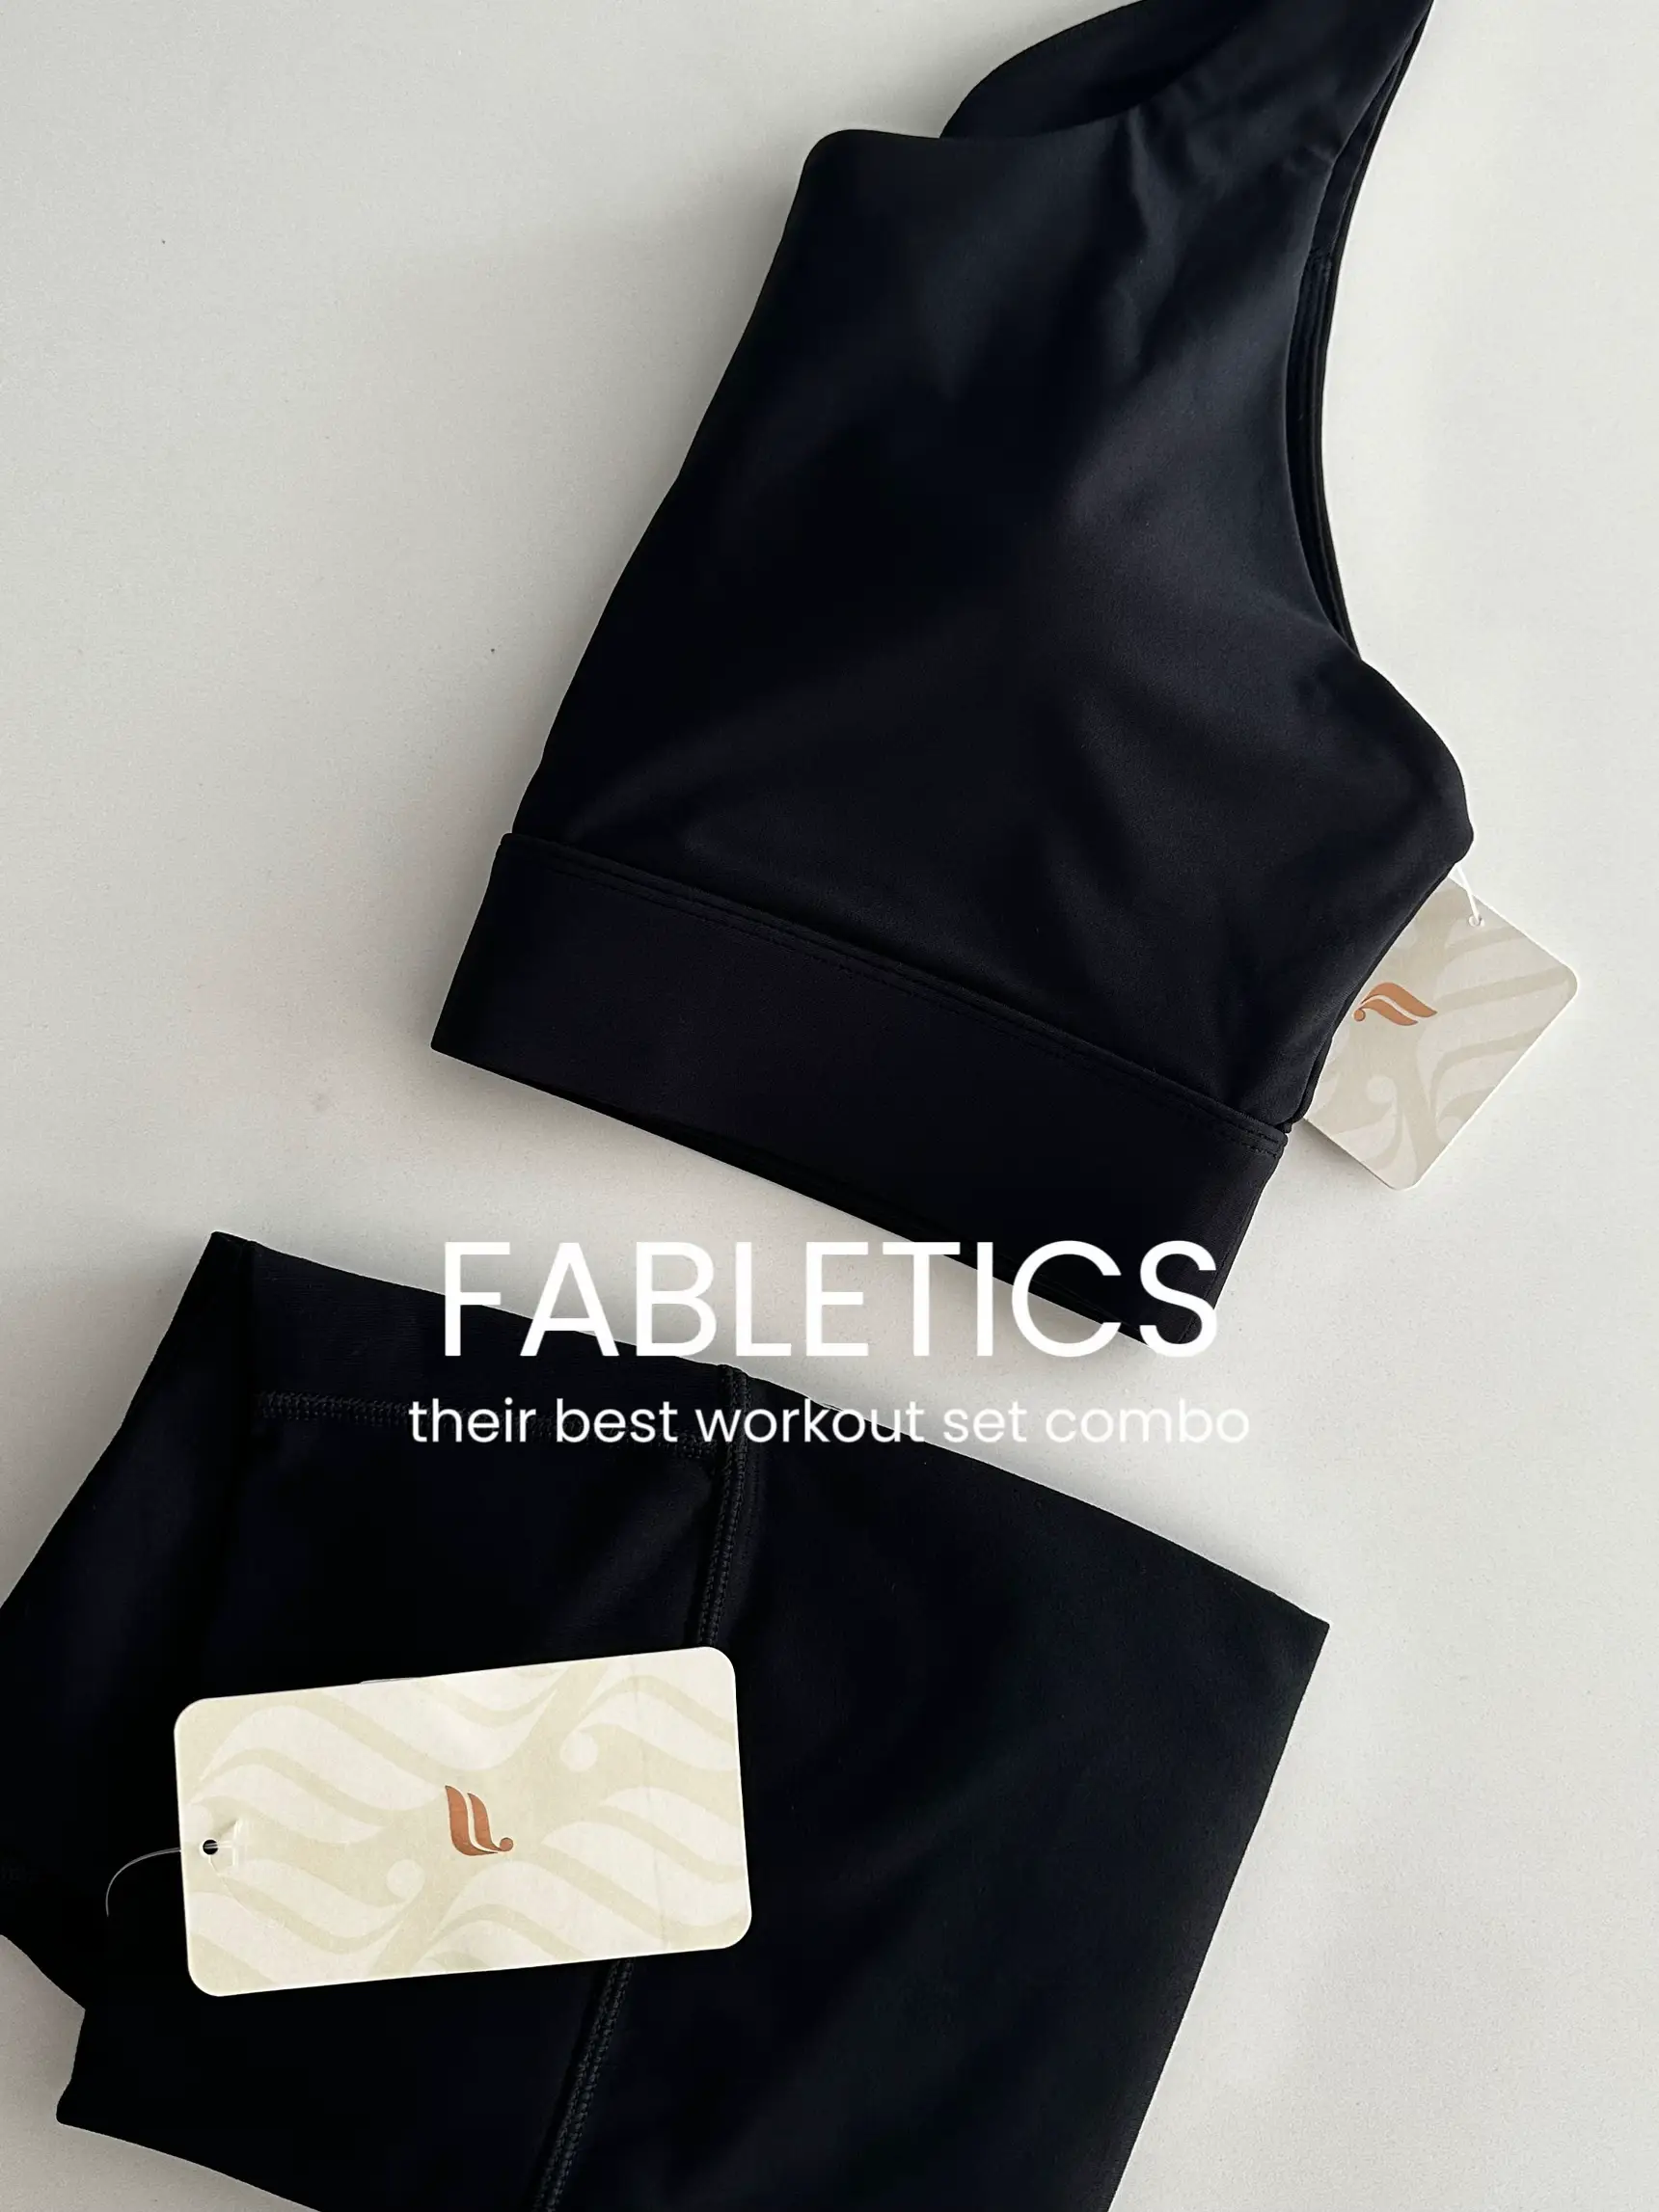 the perfect summer set ✨ @fabletics #moveinfabletics